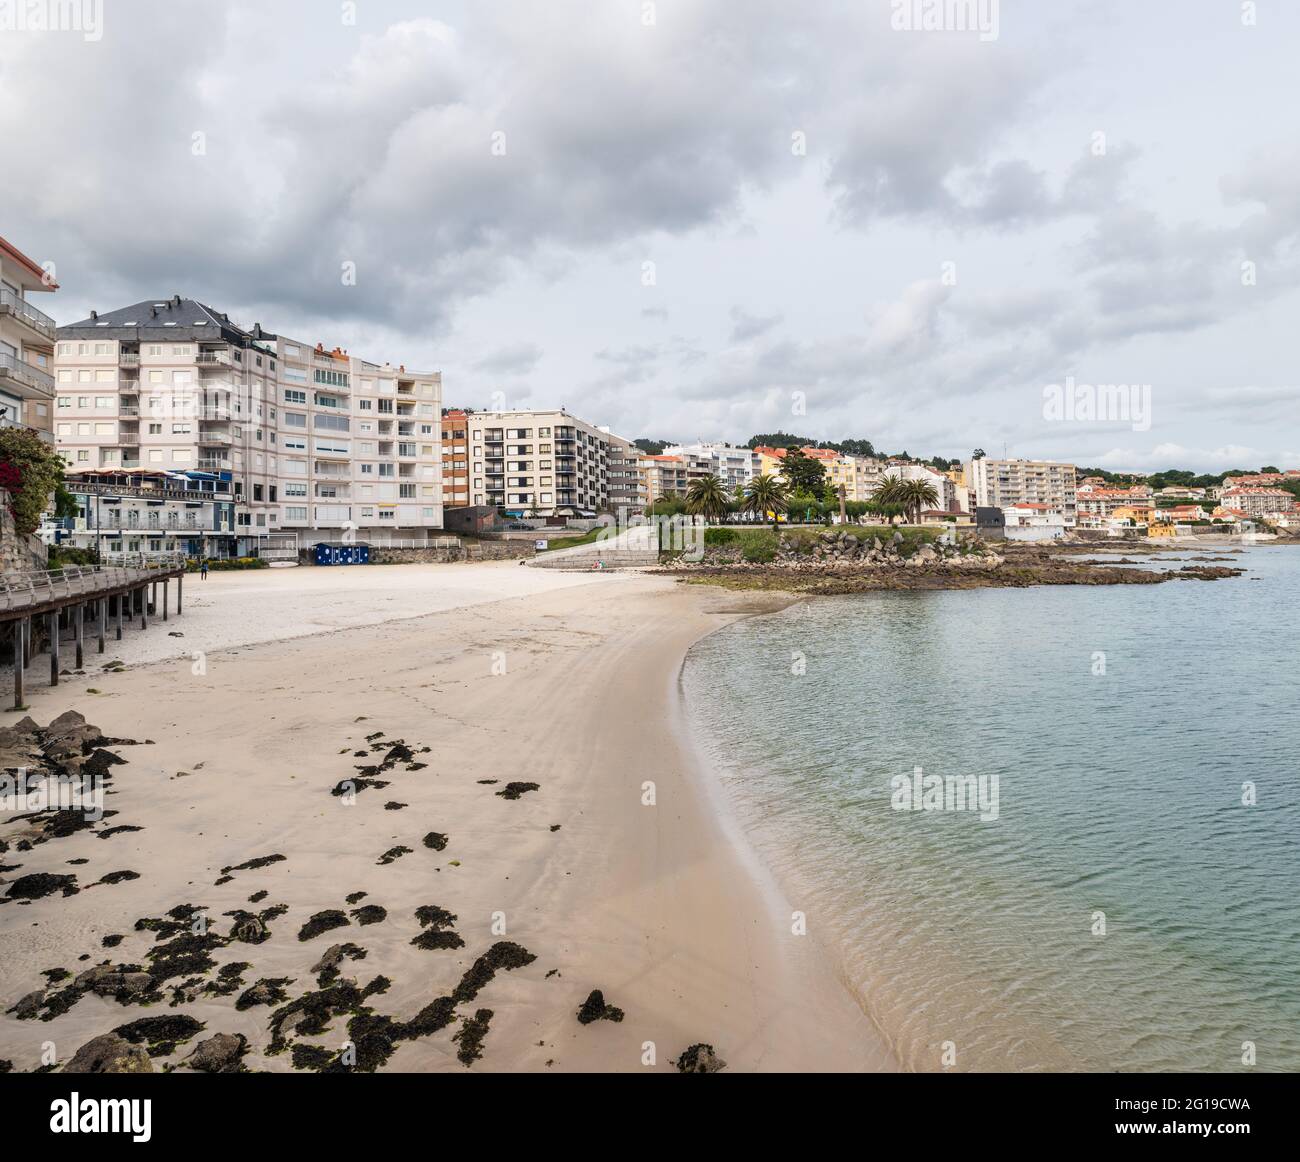 SANXENXO, SPAIN - MAY 21, 2021: Wide-angle view of Sanxenxo and Panadeira beach on a cloudy Spring day in the Rias Baixas in Galicia, Spain. Stock Photo